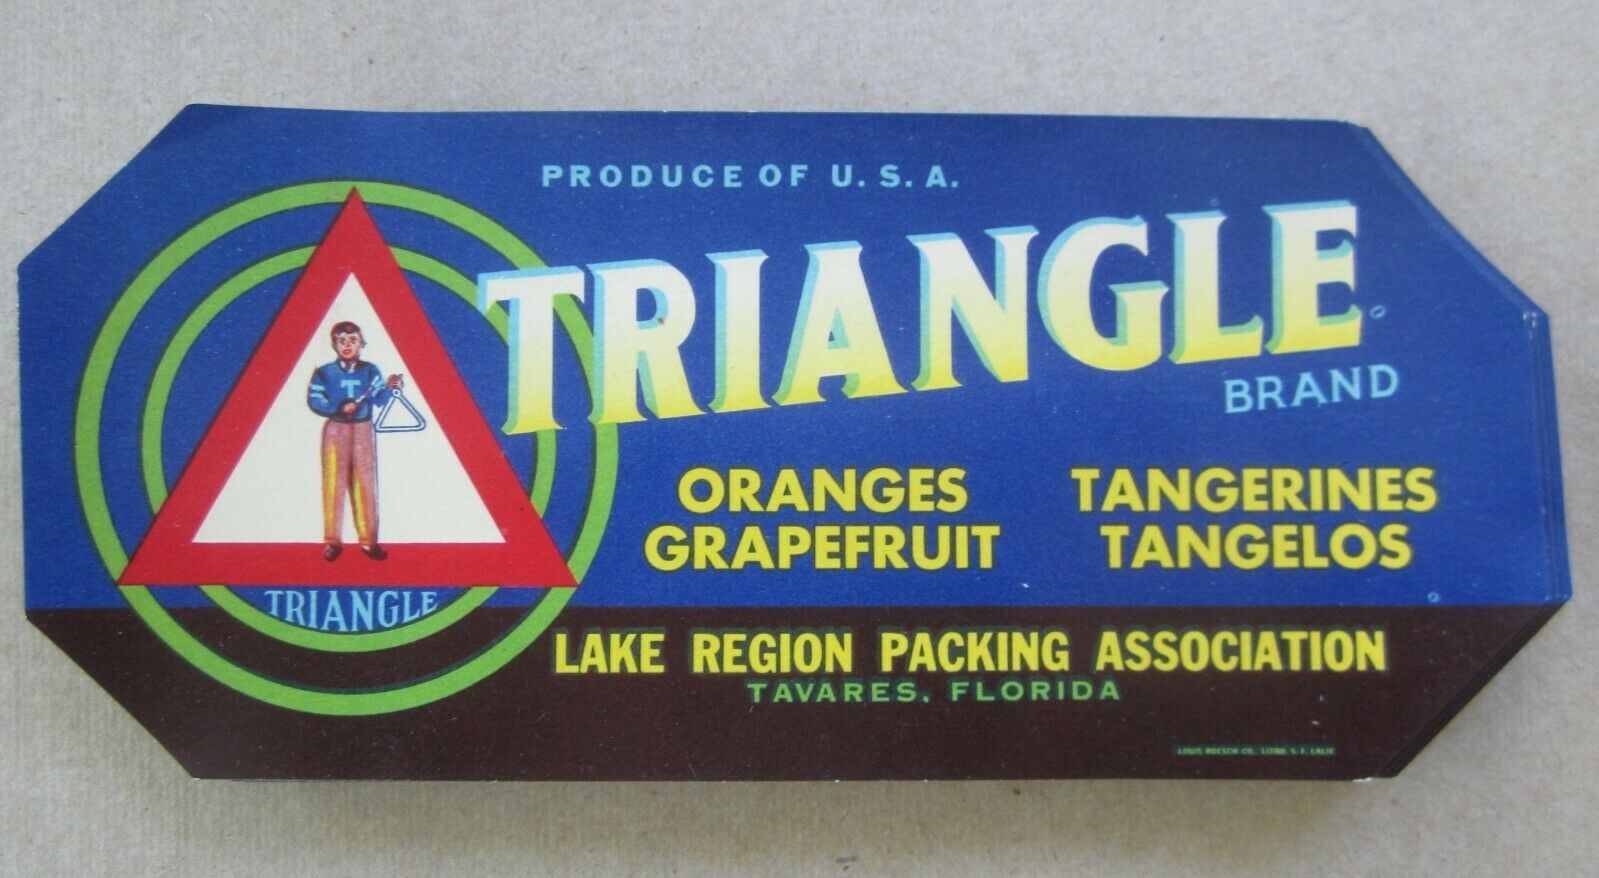  Lot of 100 Old Vintage - TRIANGLE - Florida Ci...